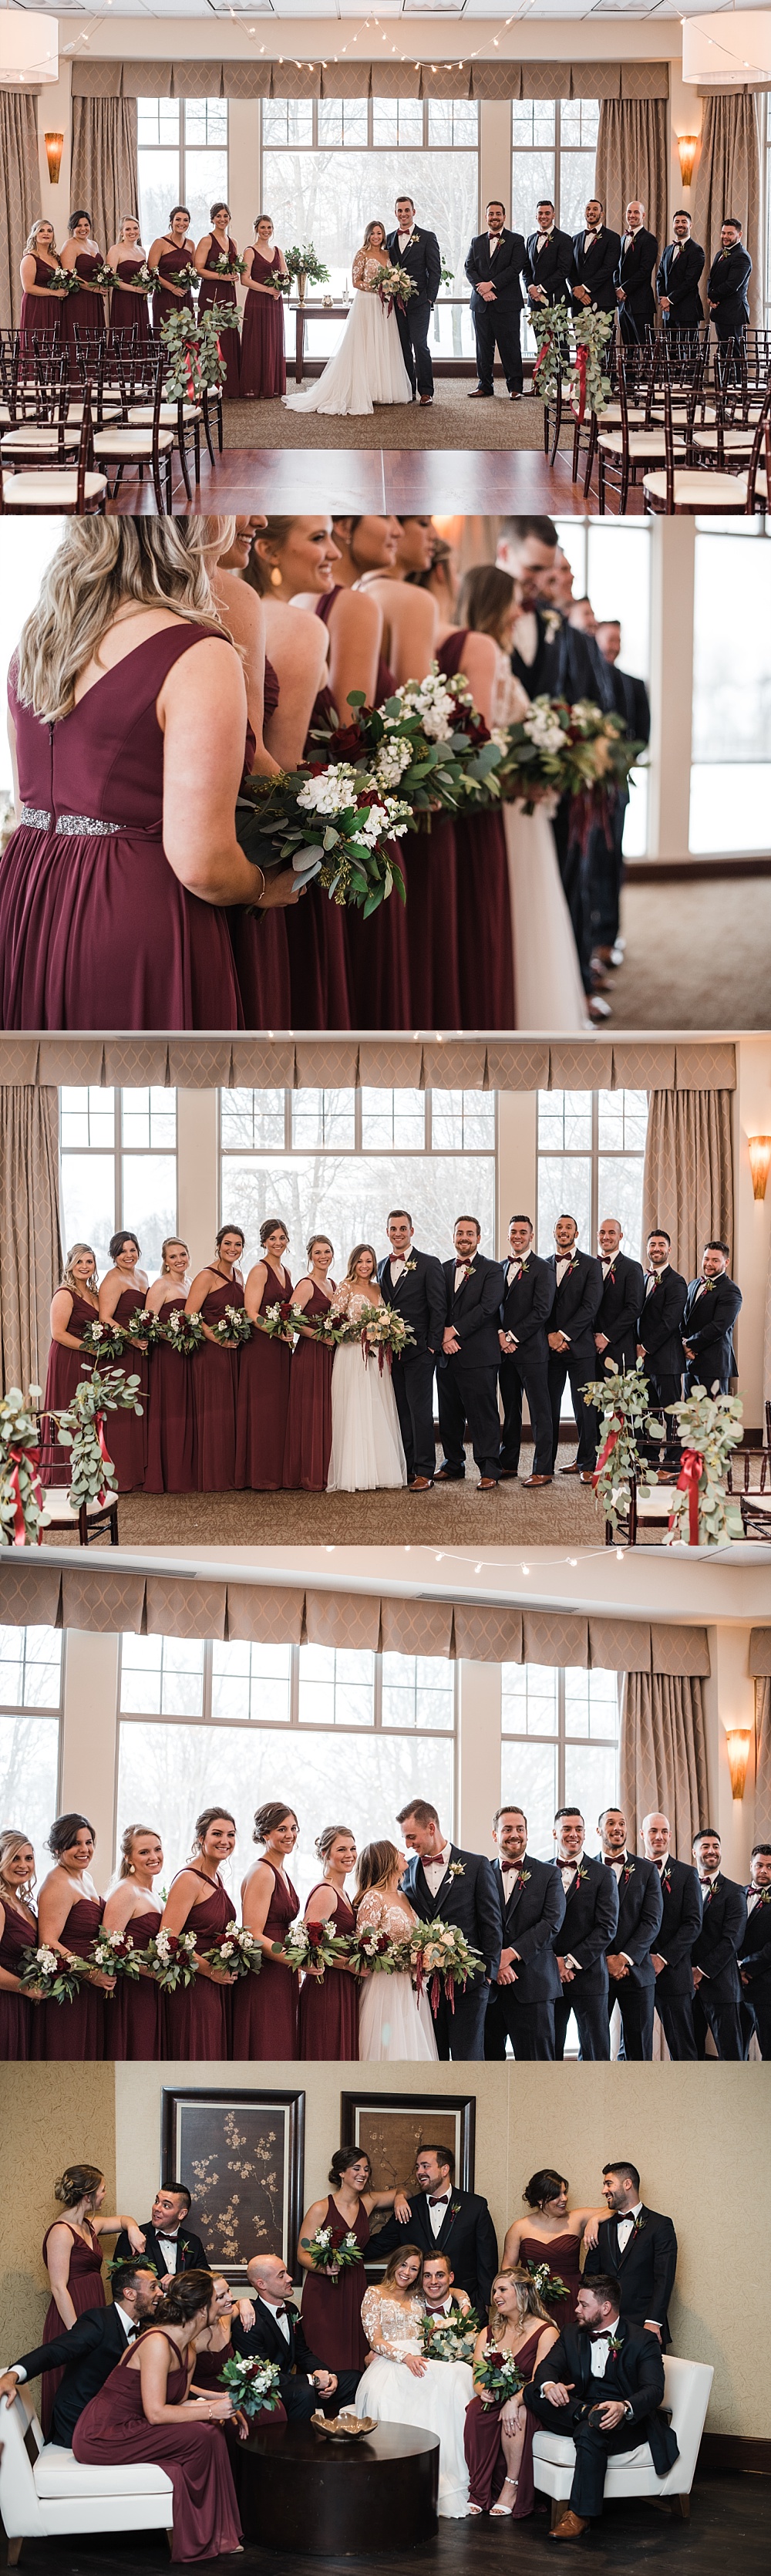 Wedding party poses in the ceremony space at Scioto Reserve Country Club